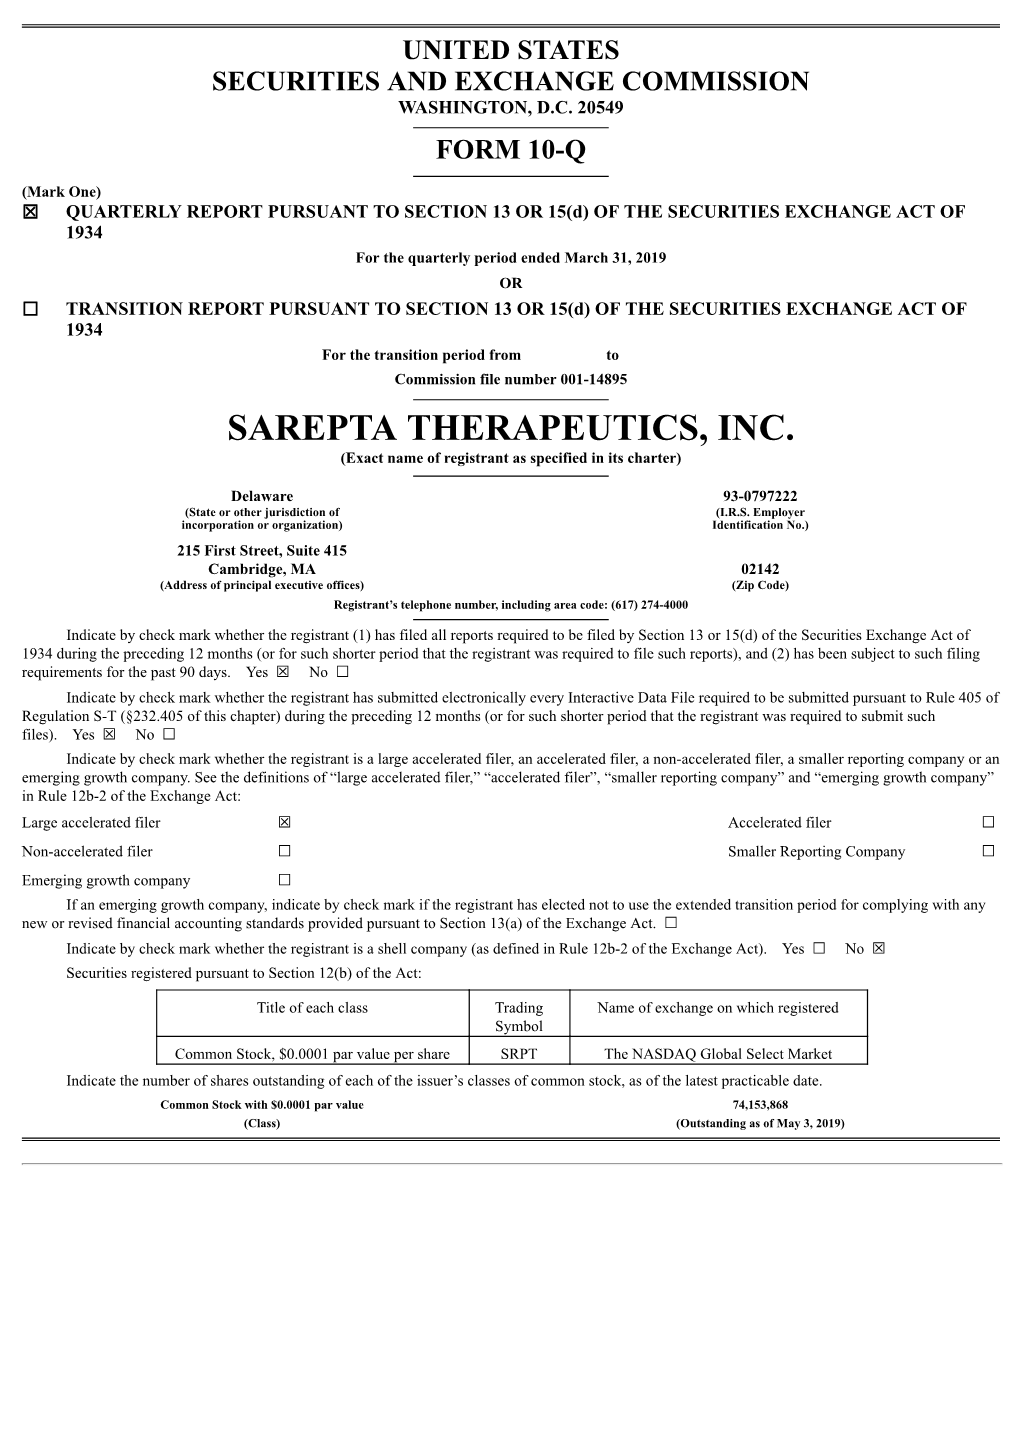 SAREPTA THERAPEUTICS, INC. (Exact Name of Registrant As Specified in Its Charter)